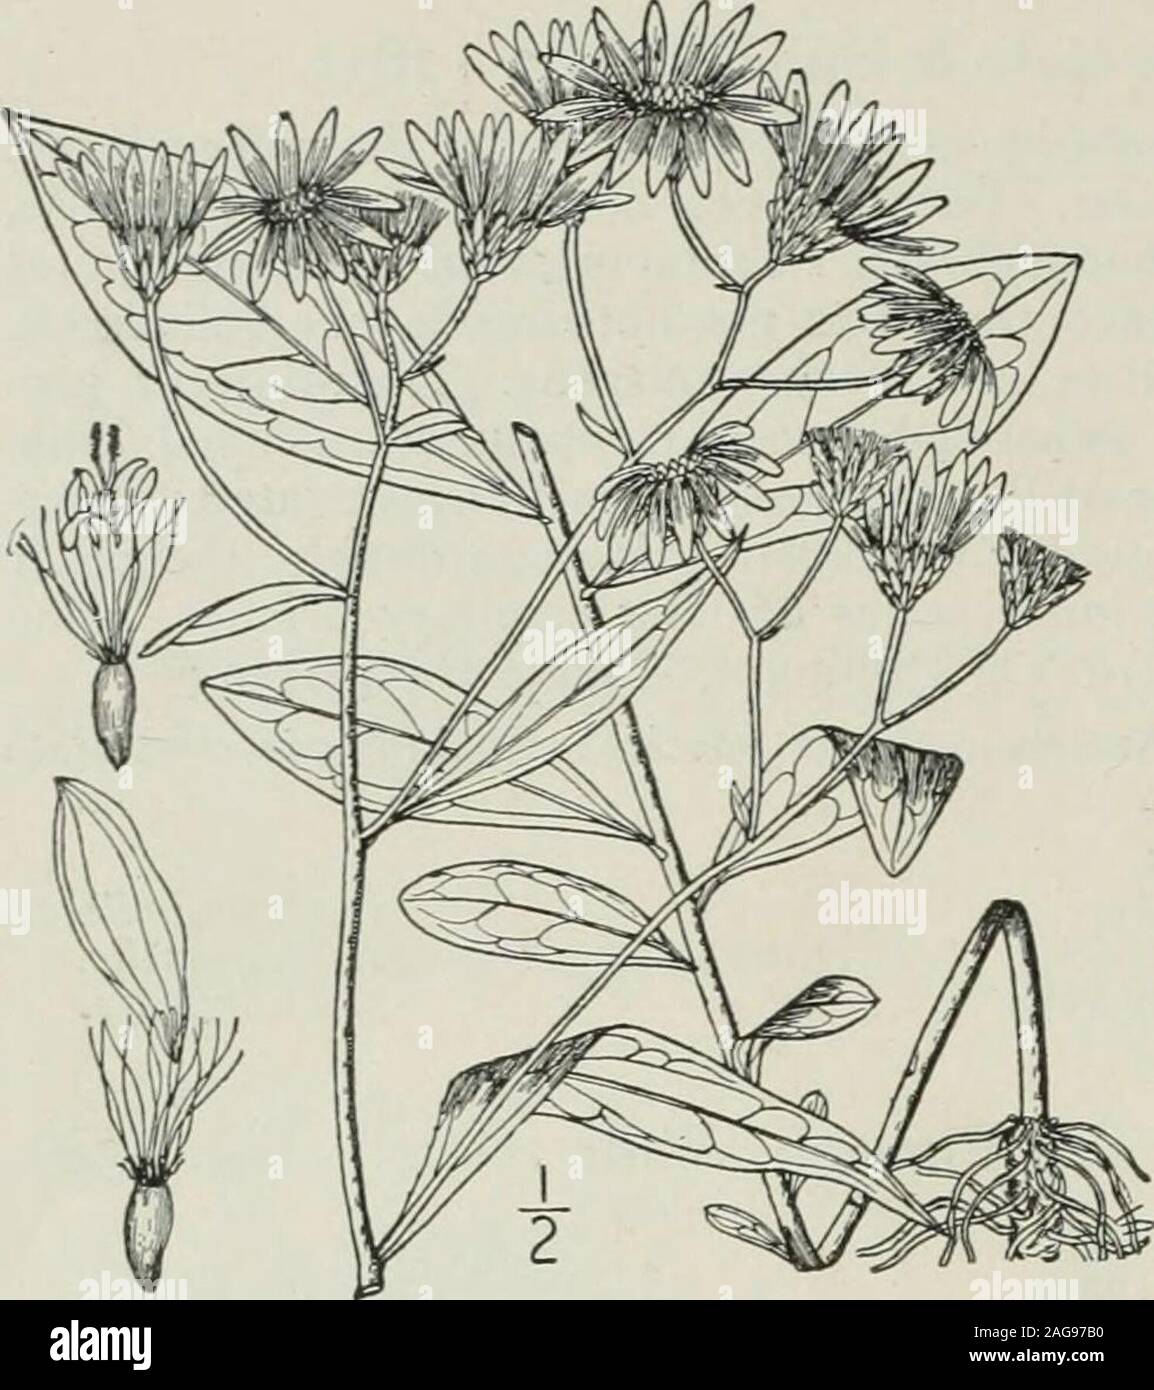 . An illustrated flora of the northern United States, Canada and the British possessions : from Newfoundland to the parallel of the southern boundary of Virginia and from the Atlantic Ocean westward to the 102nd meridian. Pennsylvania, Florida and Texas. 2. Doellingeria humilis (Willd.) Britton. Broad-leaved Flat-top White Aster. Fig. 438 L Aster humilis Willd. Sp. PI. 3: 2038. 1804. D. amygdaling, Nees, Gen. & Sp. Ast. 179. 1832. Aster umbellatus var. latifalius A. Gray, Syn. Fl. i : Part 2, 197. 1884.Doellingeria humilis Britton, in Britt. & Brown, III. Fl. 3: 392. 1898. Similar to the prece Stock Photo